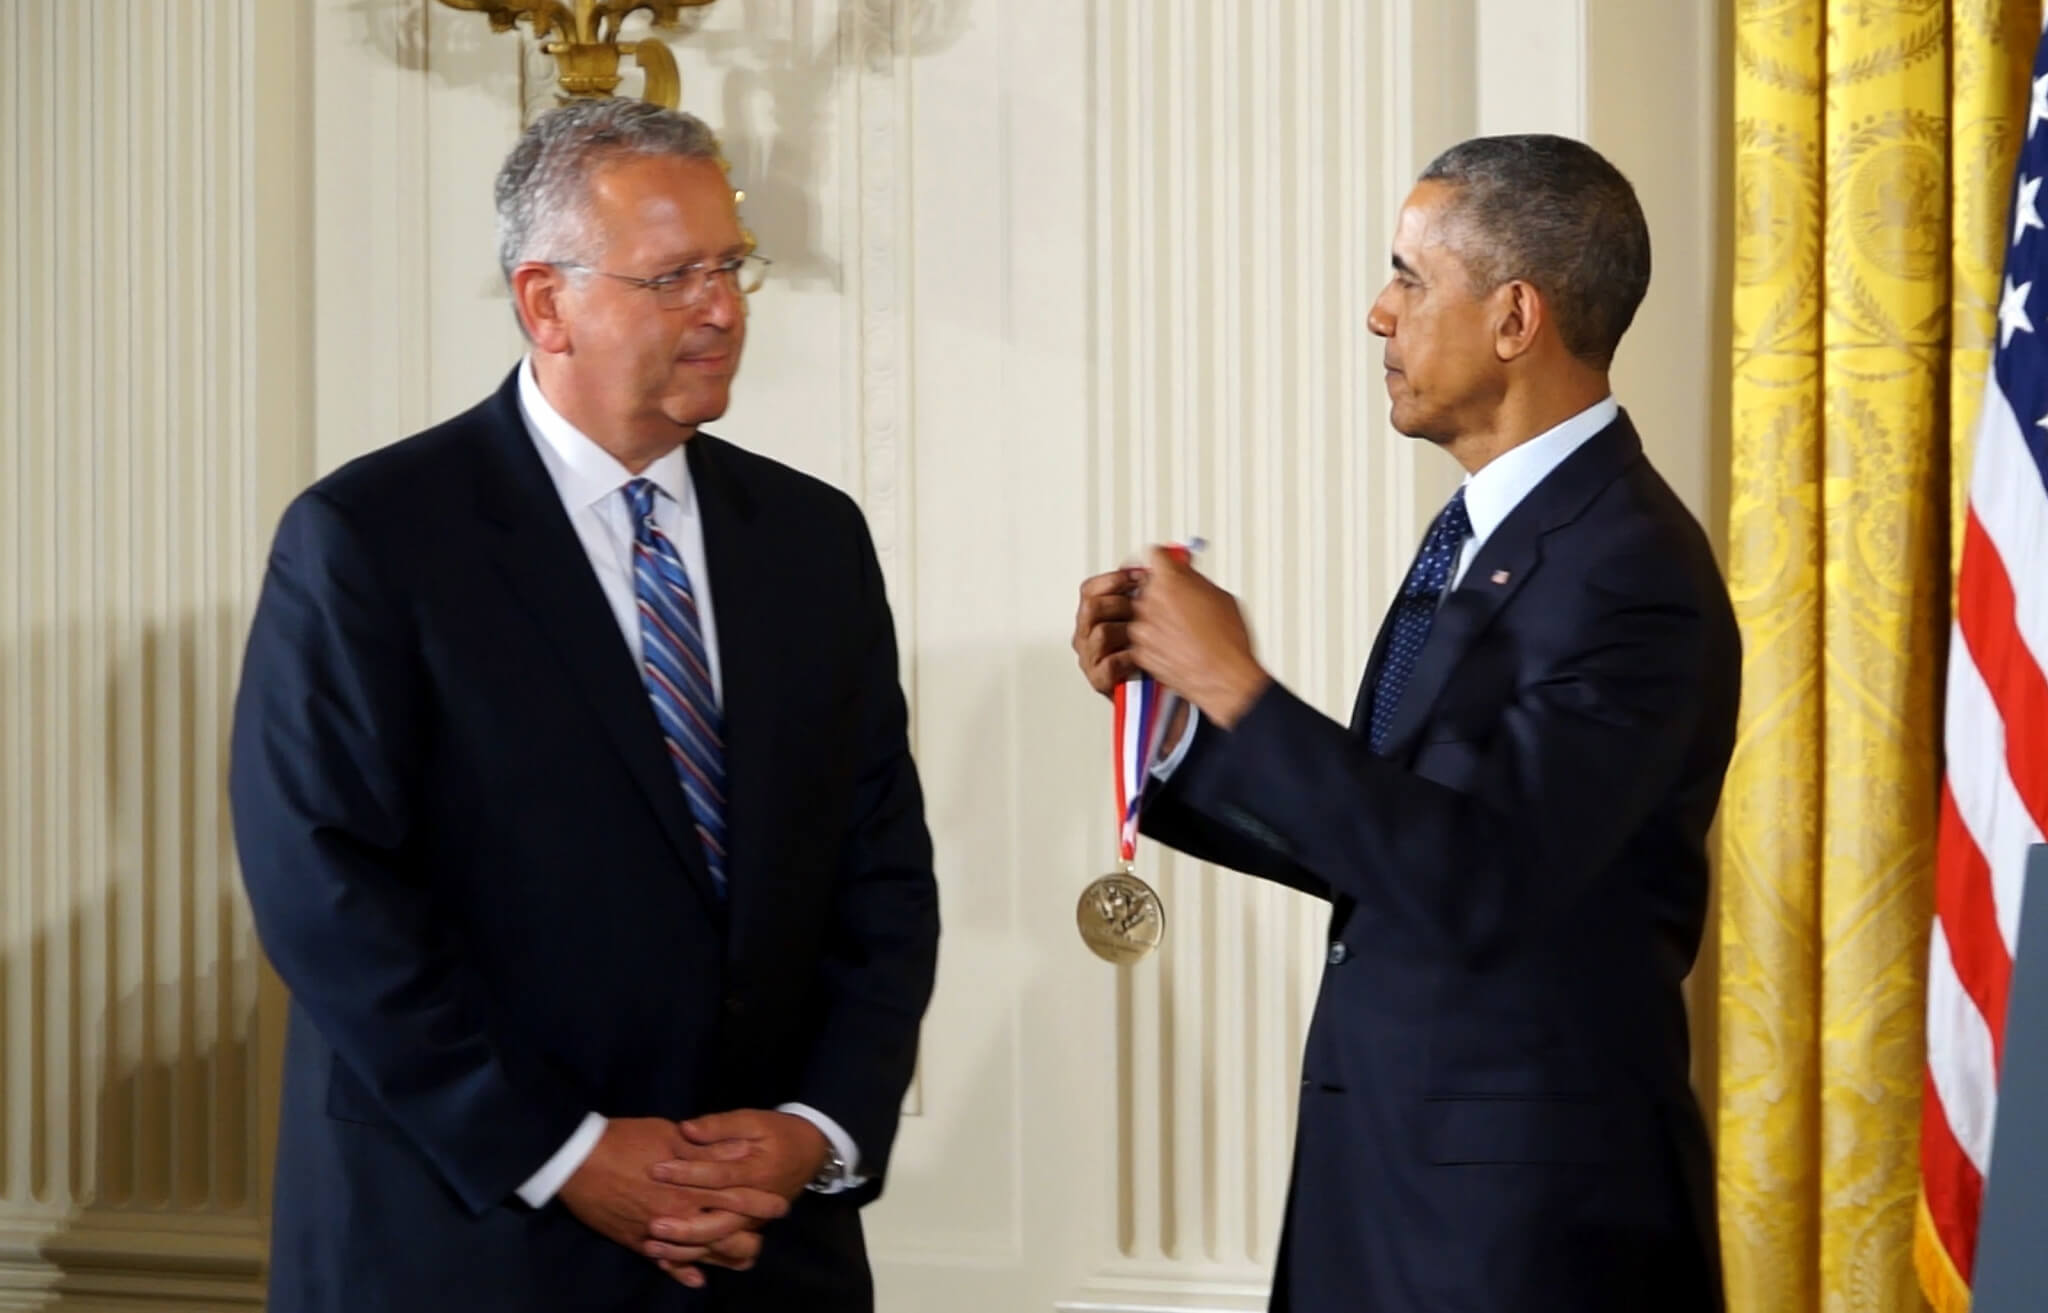 Joseph DeSimone is given an award by Presdient Obama.